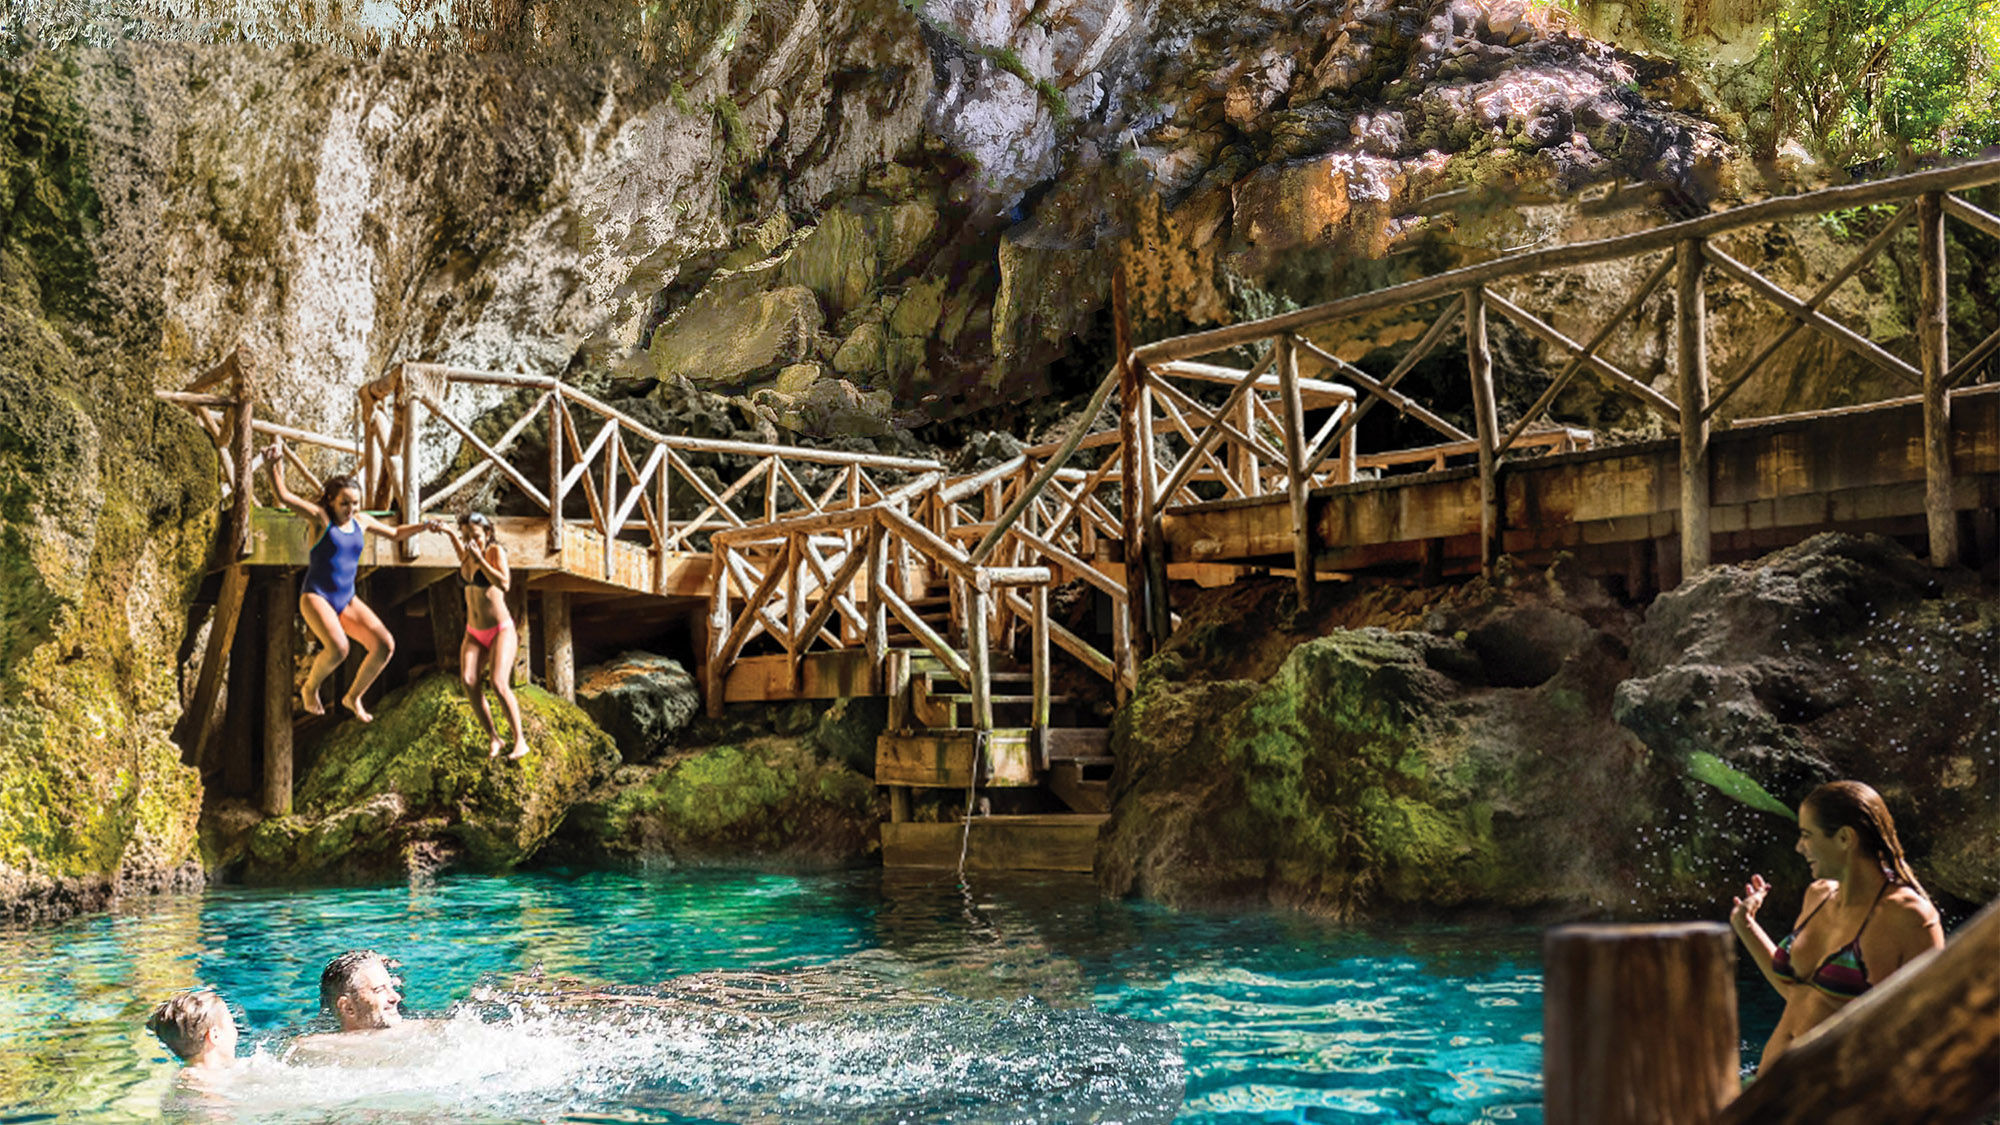 The nearby Scape Park features cave swimming, ziplines, animal sanctuaries and a replica Taino village.